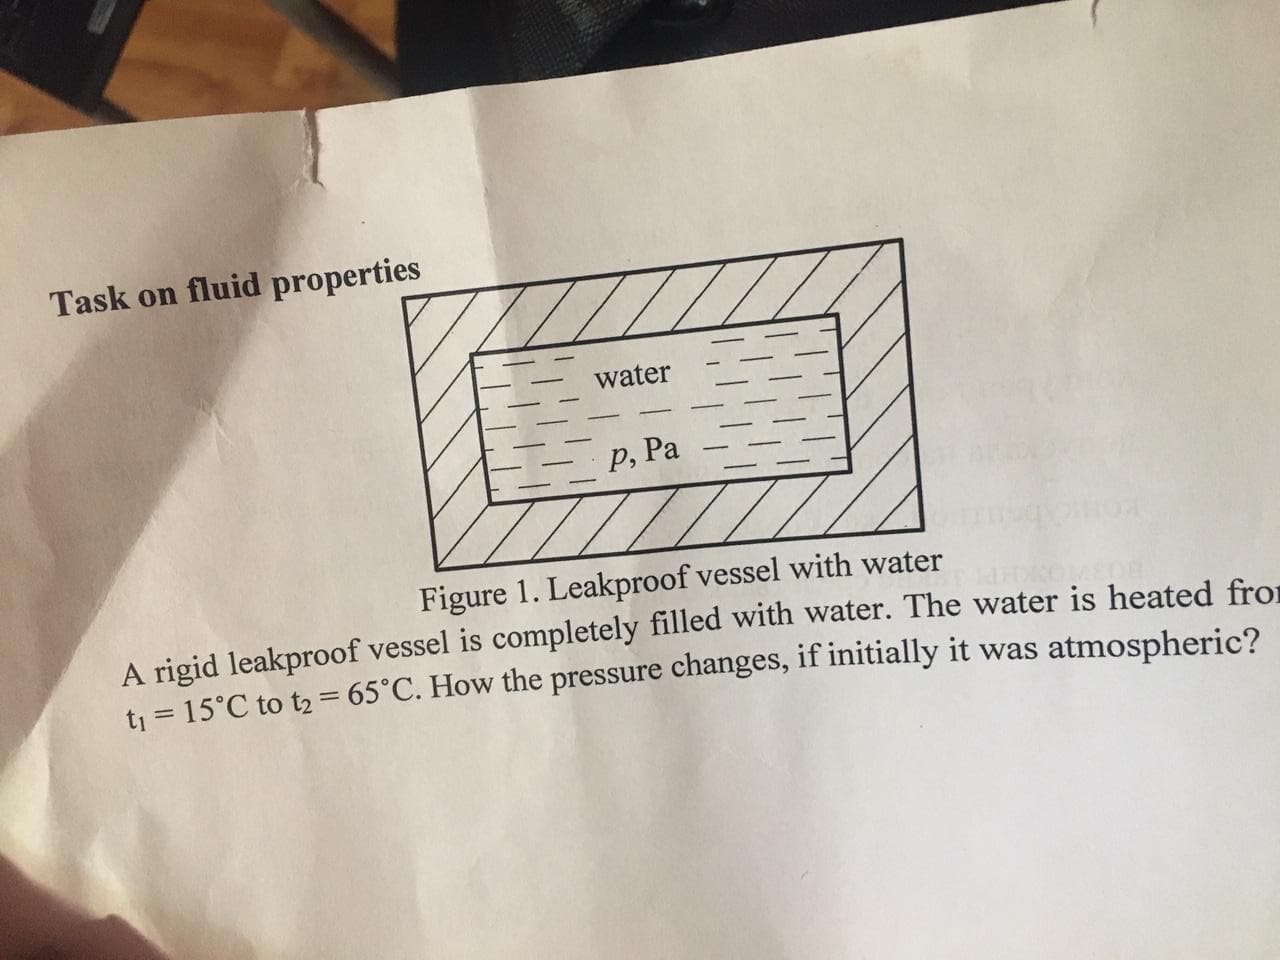 Task on fluid properties
water
Р, Ра
Figure 1. Leakproof vessel with water
A rigid leakproof vessel is completely filled with water. The water is heated from
tj = 15°C to t2 = 65°C. How the pressure changes, if initially it was atmospheric?
